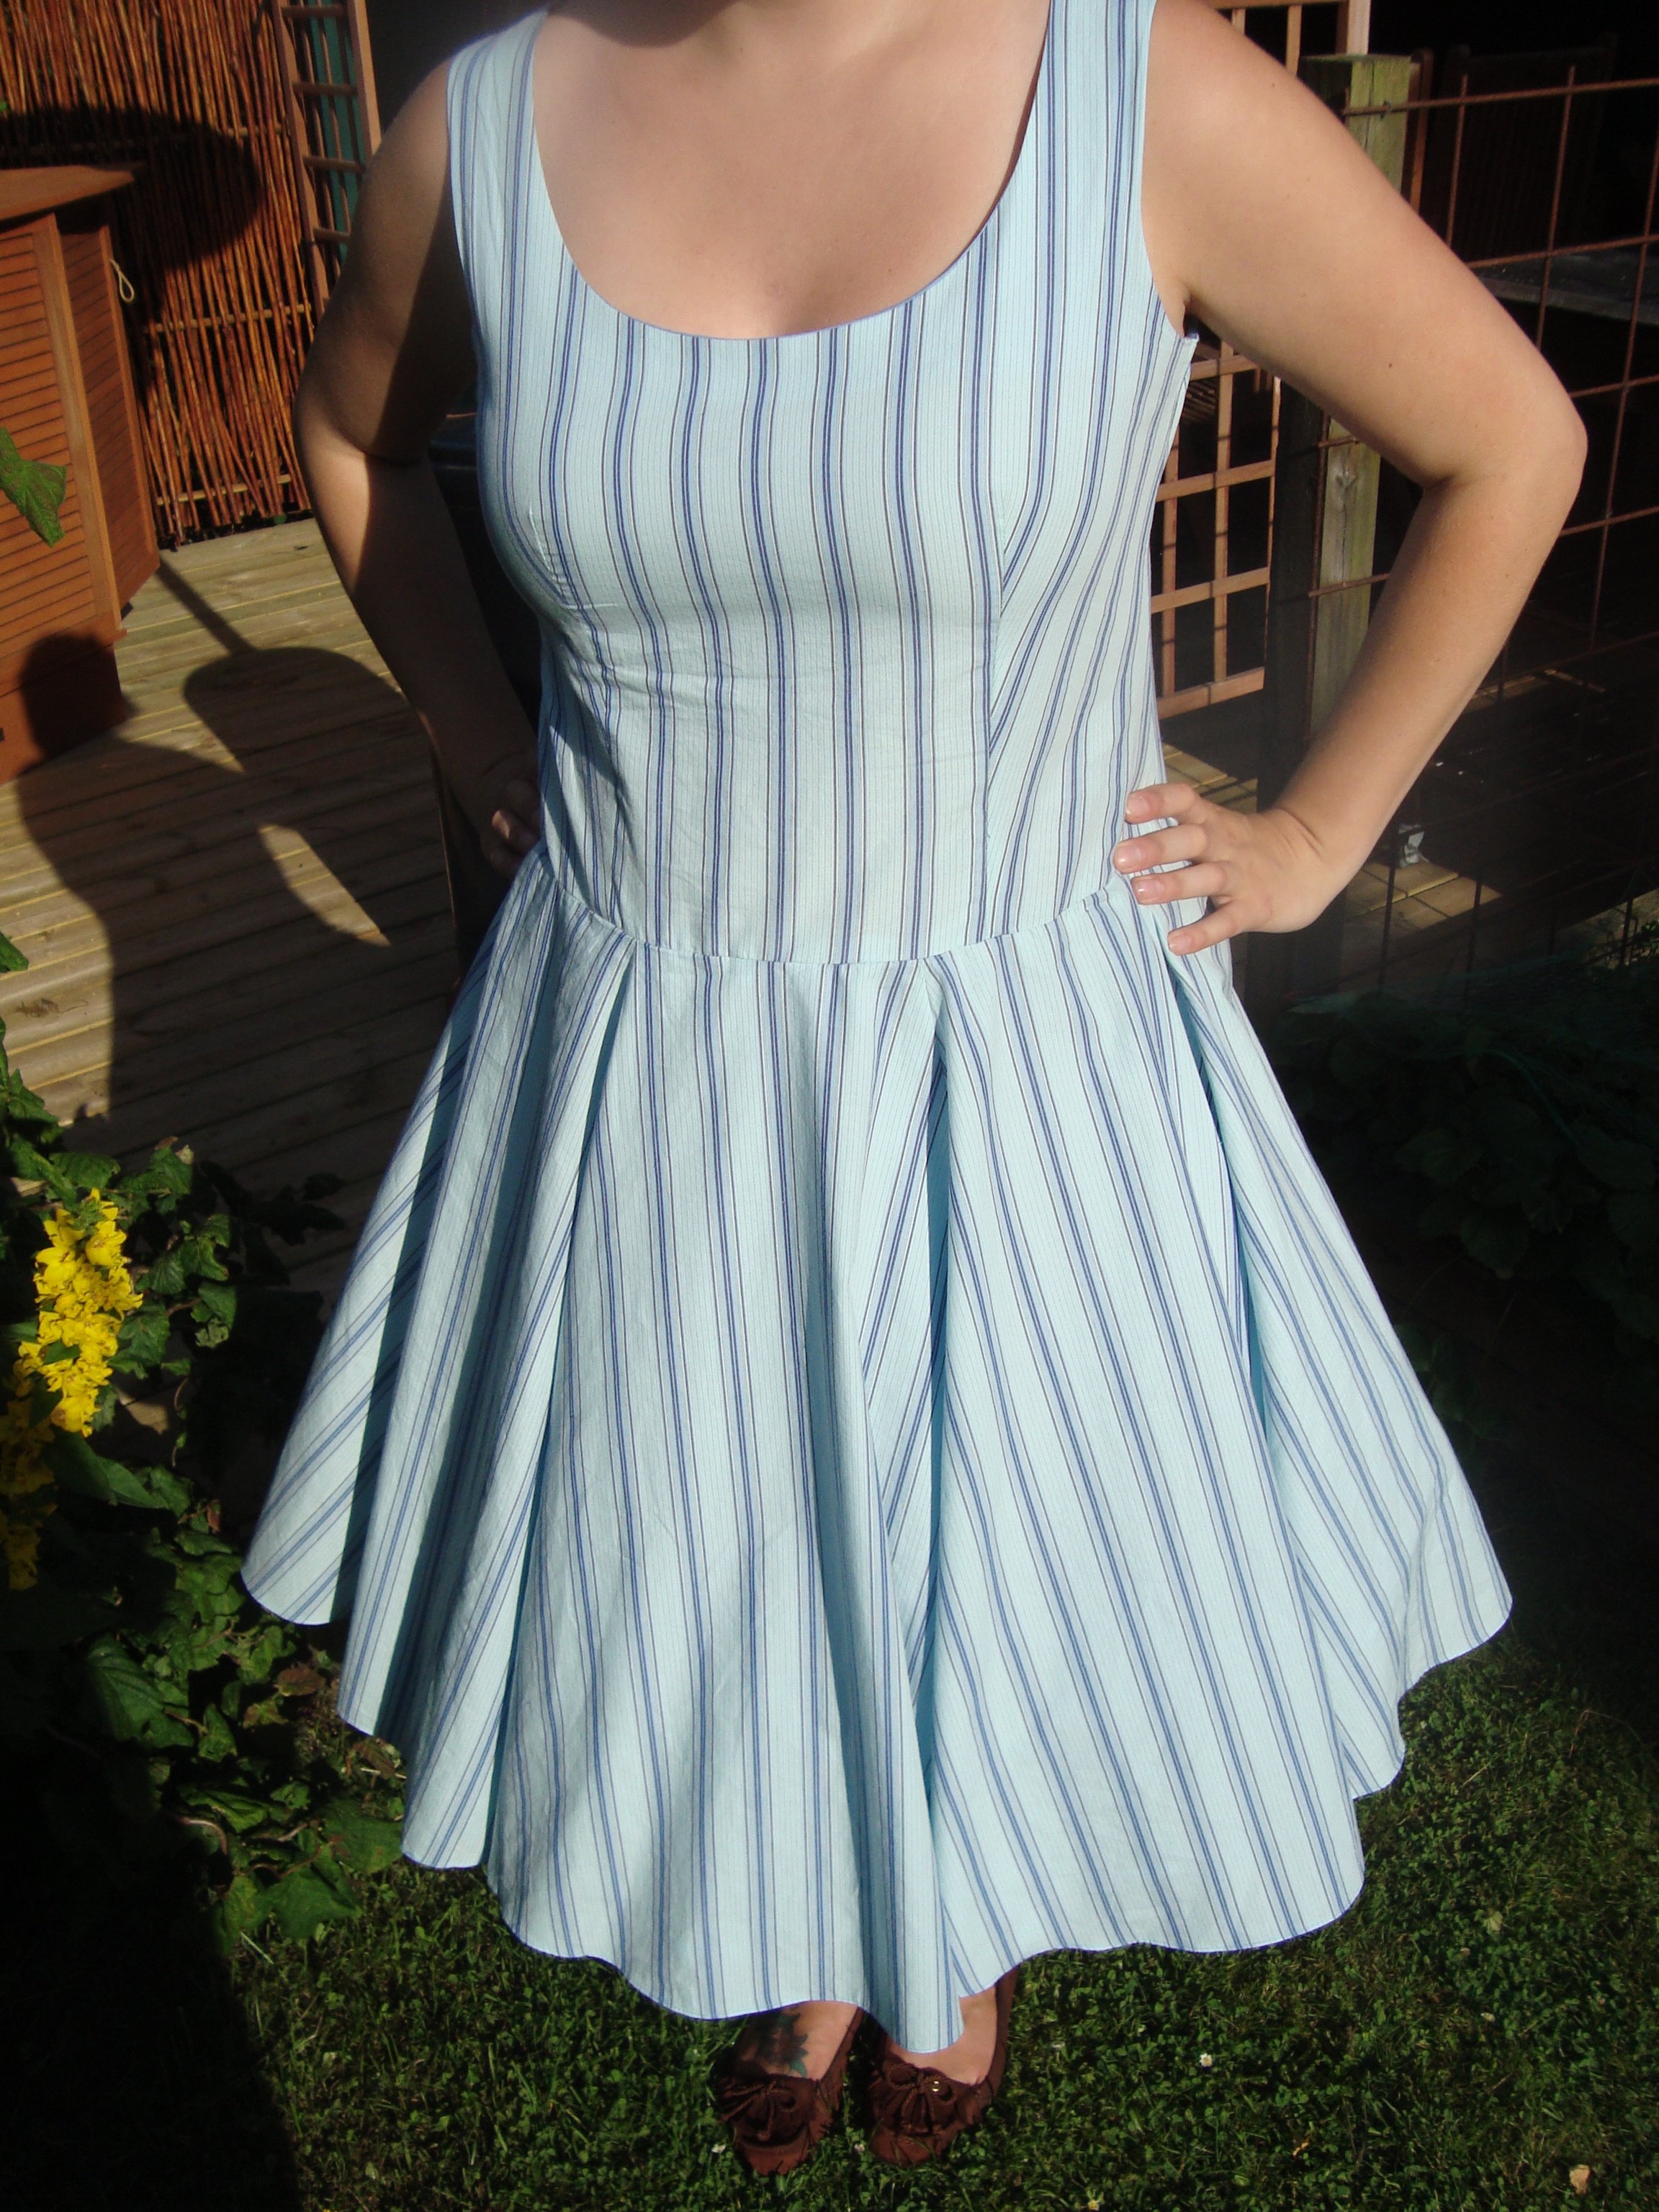 My own 50's dress – Sewing Projects | BurdaStyle.com